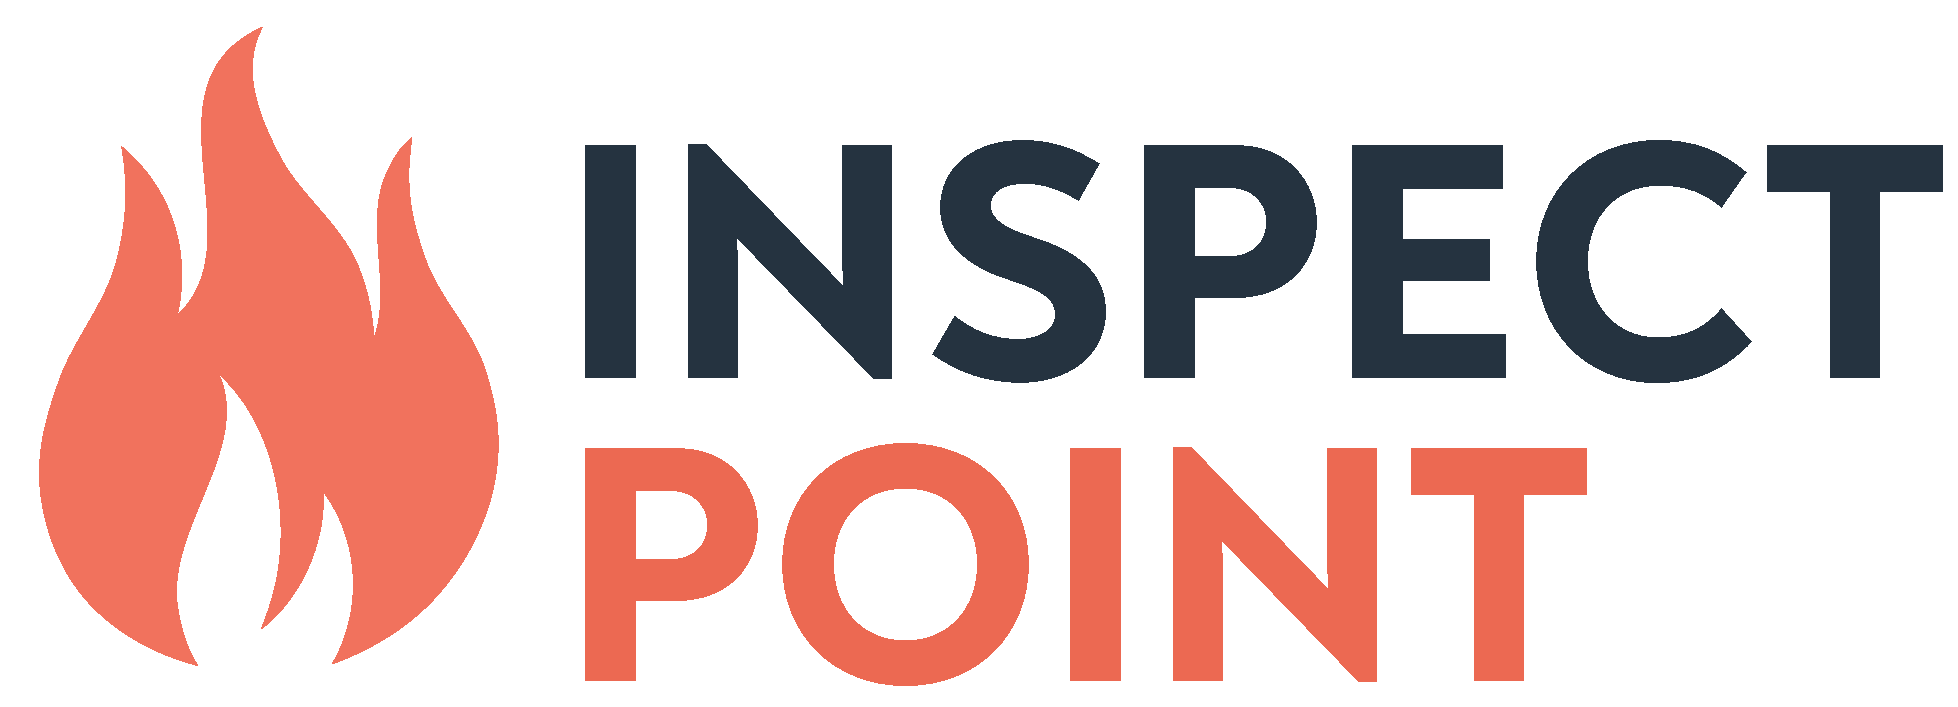 InspectPoint - No Background.png